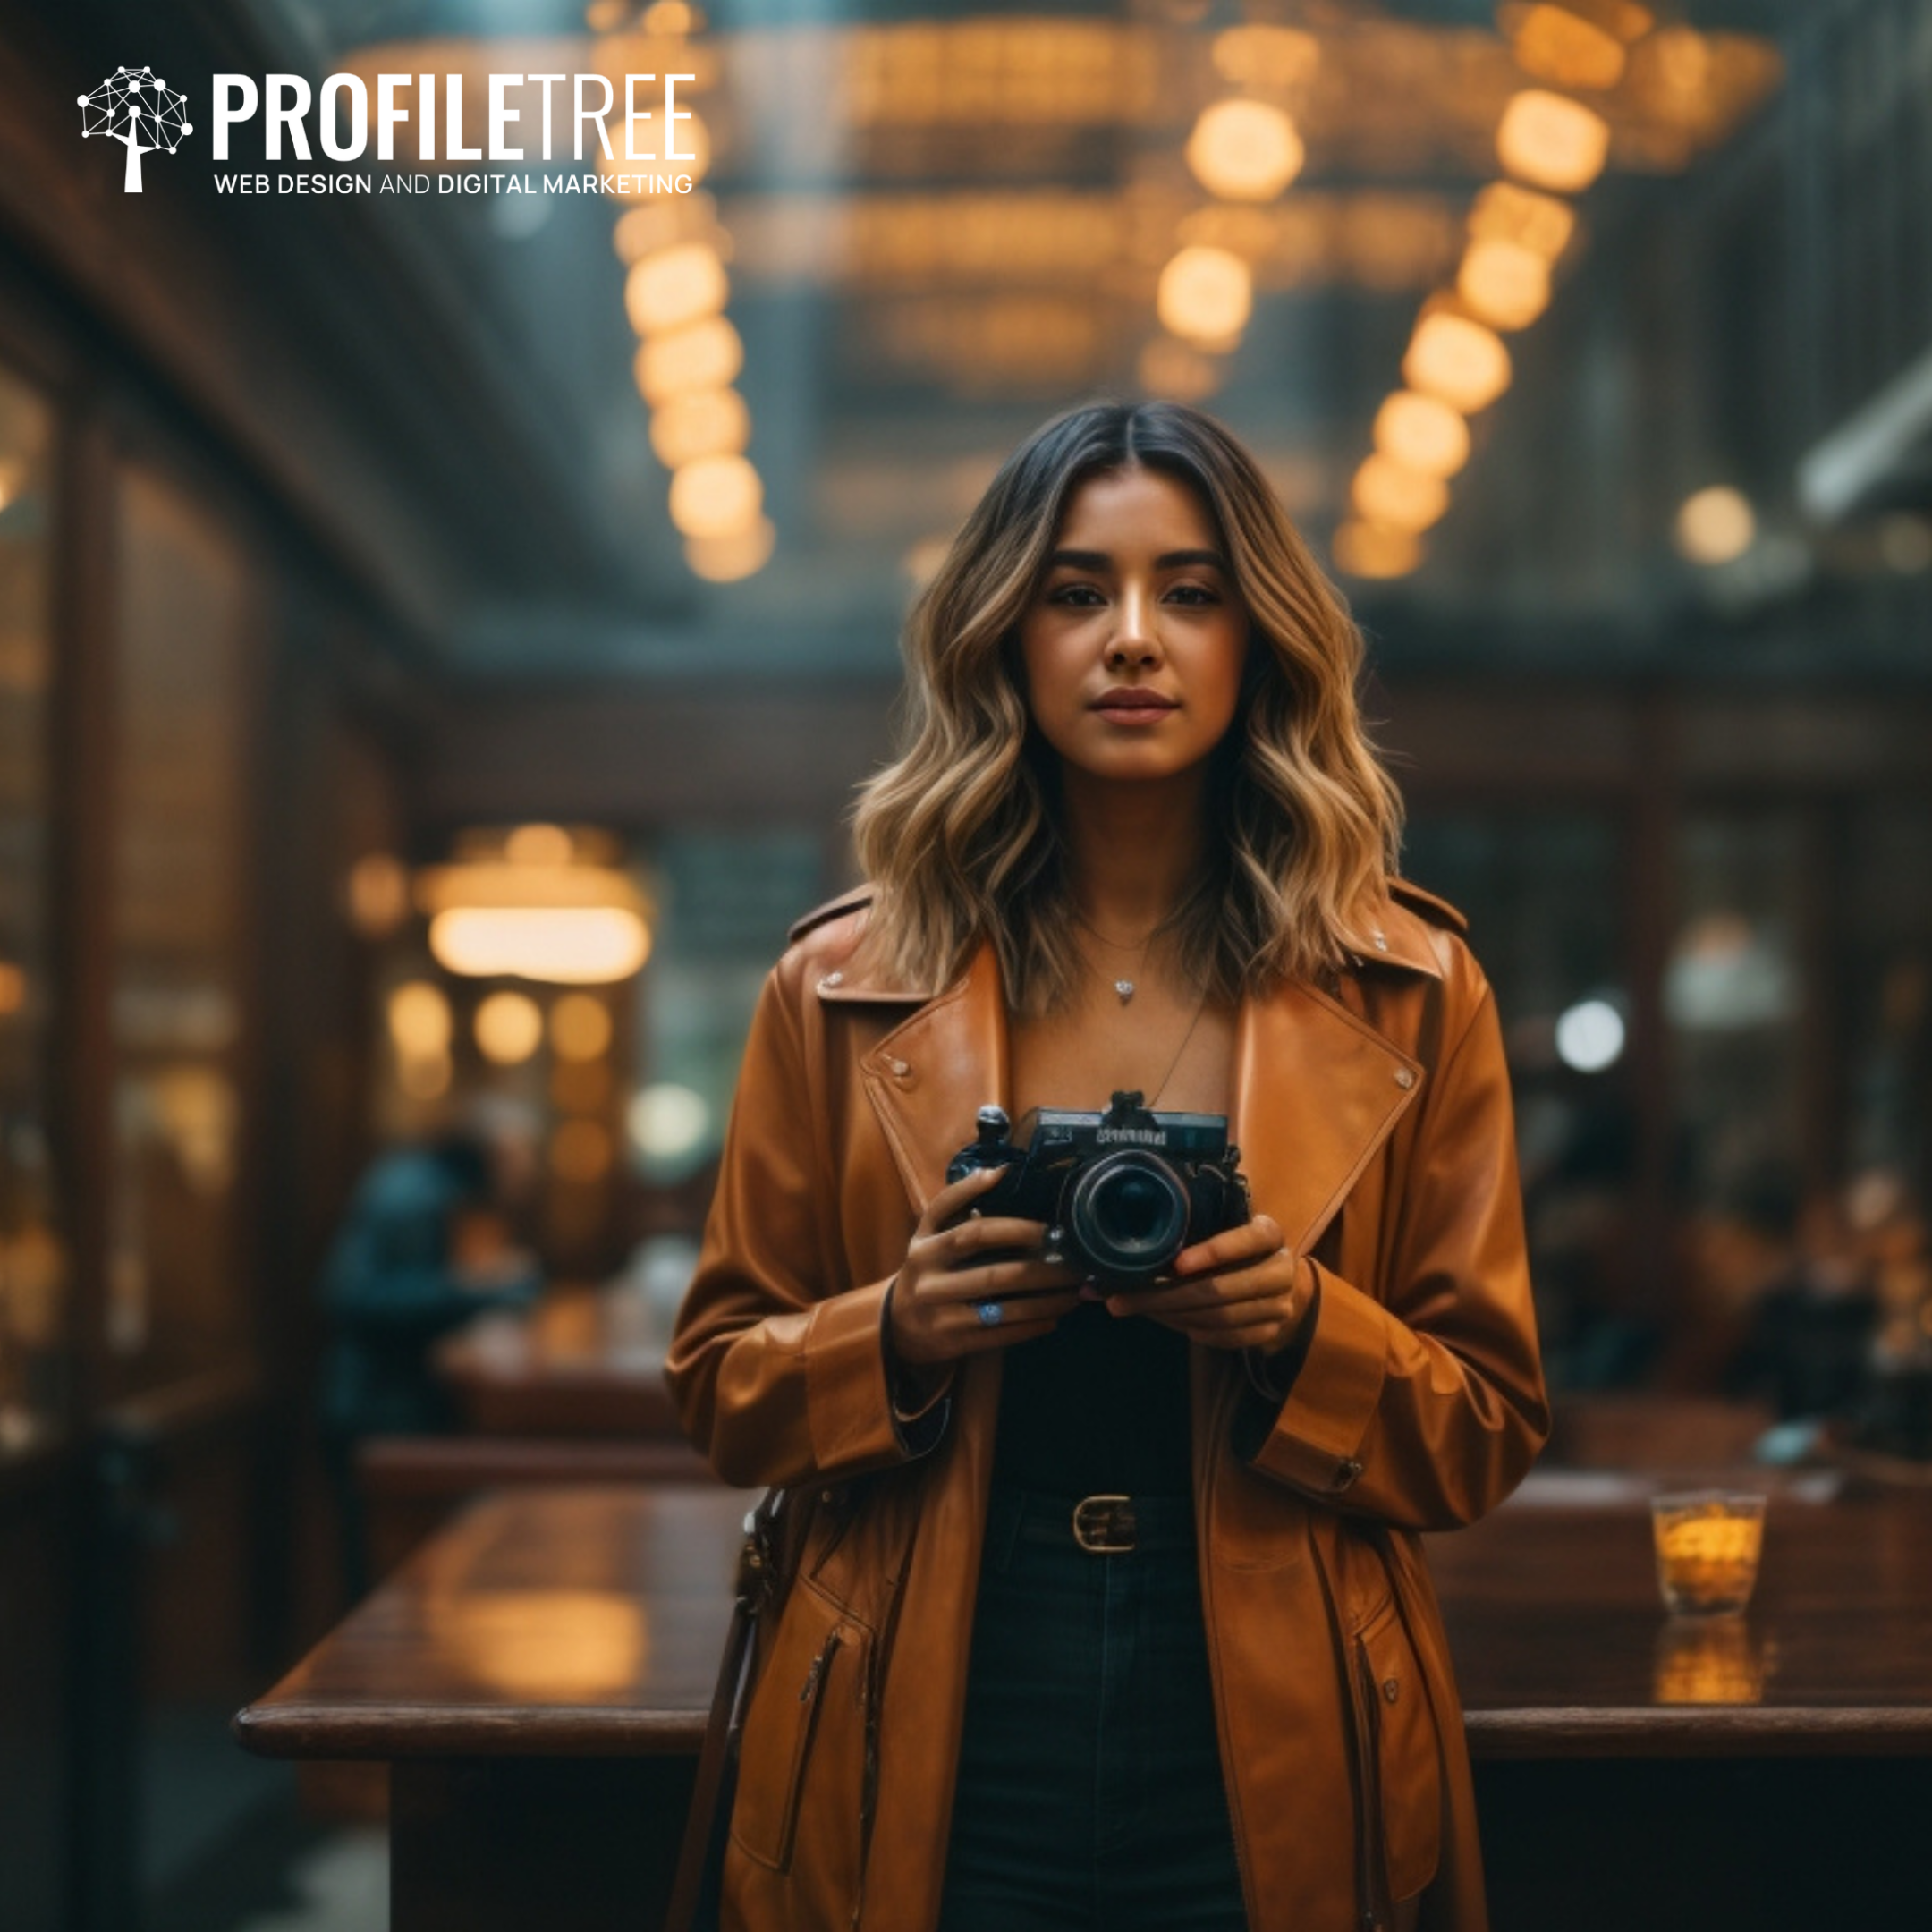 Image of influencer with camera